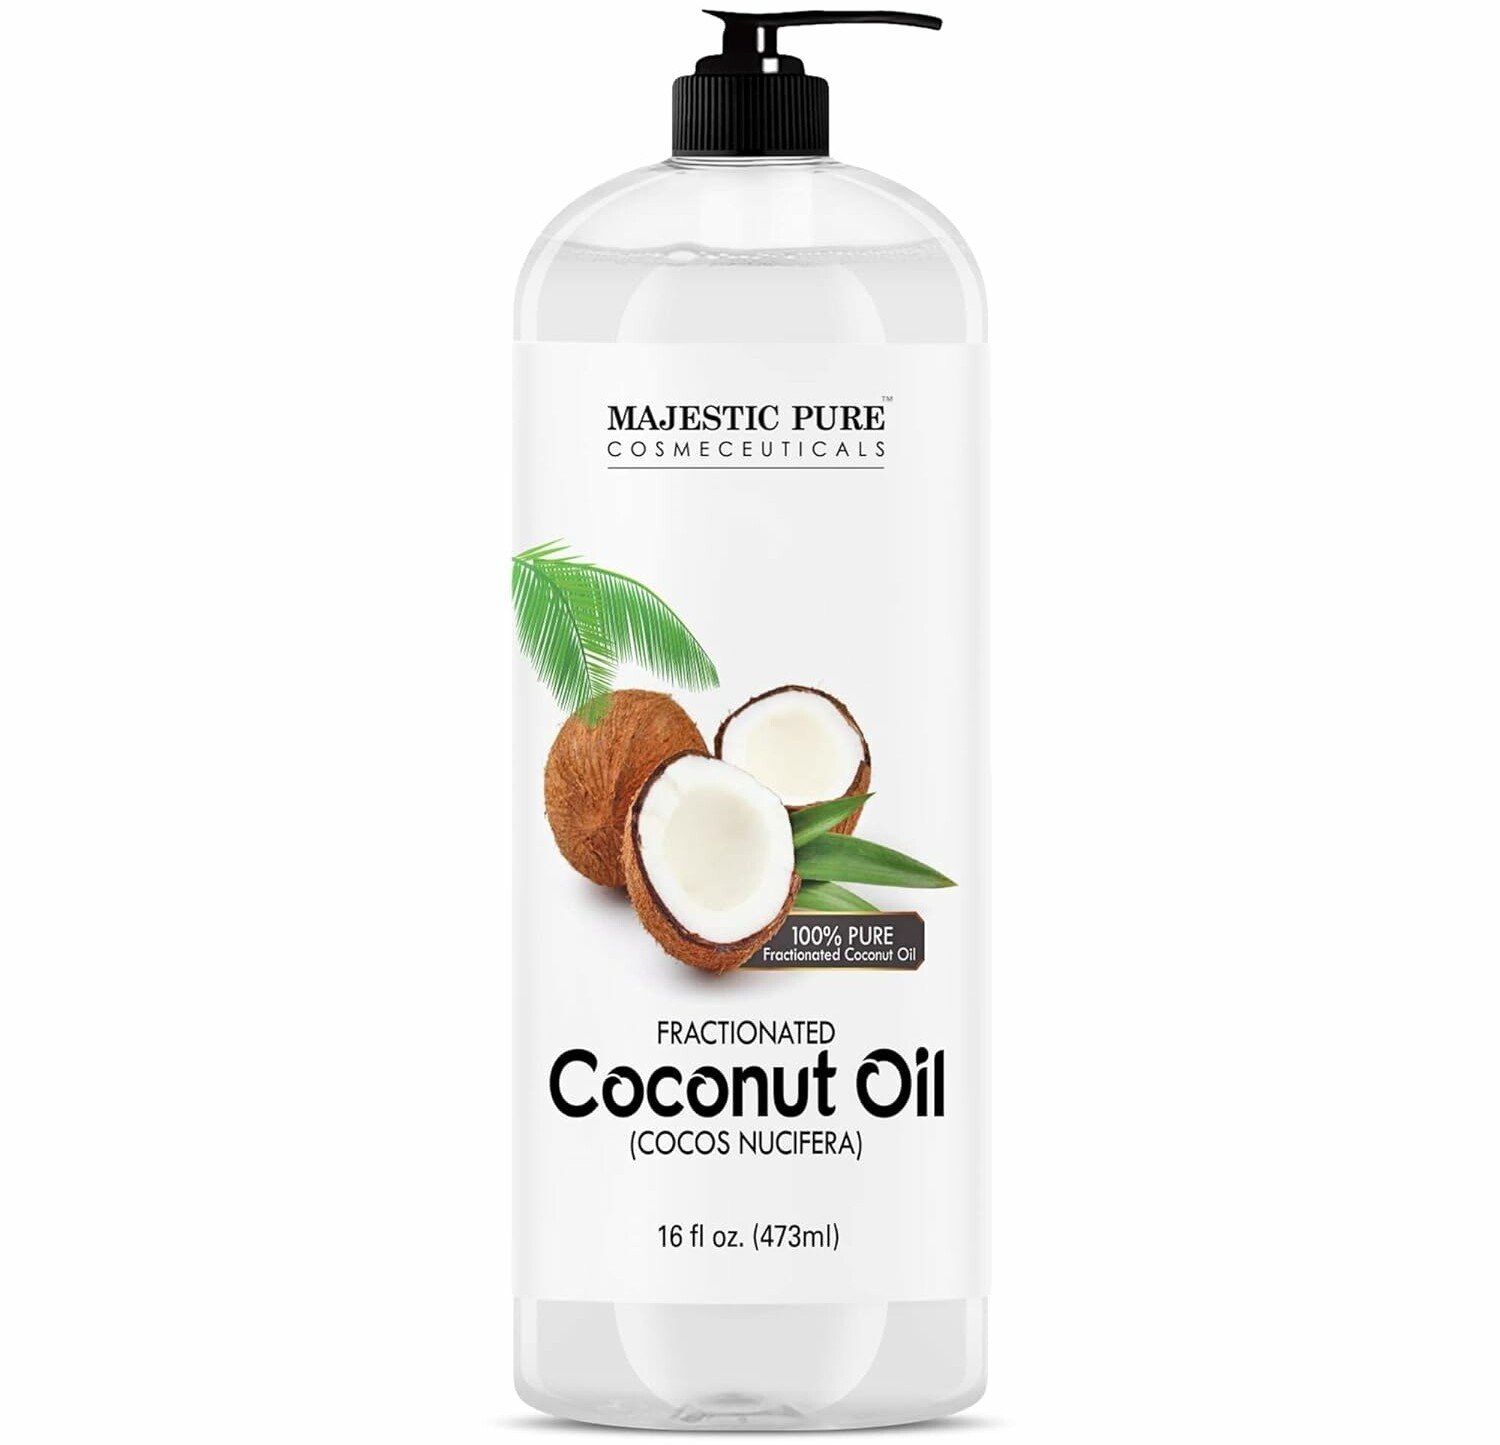 Majestic Pure Fractionated Coconut Oil